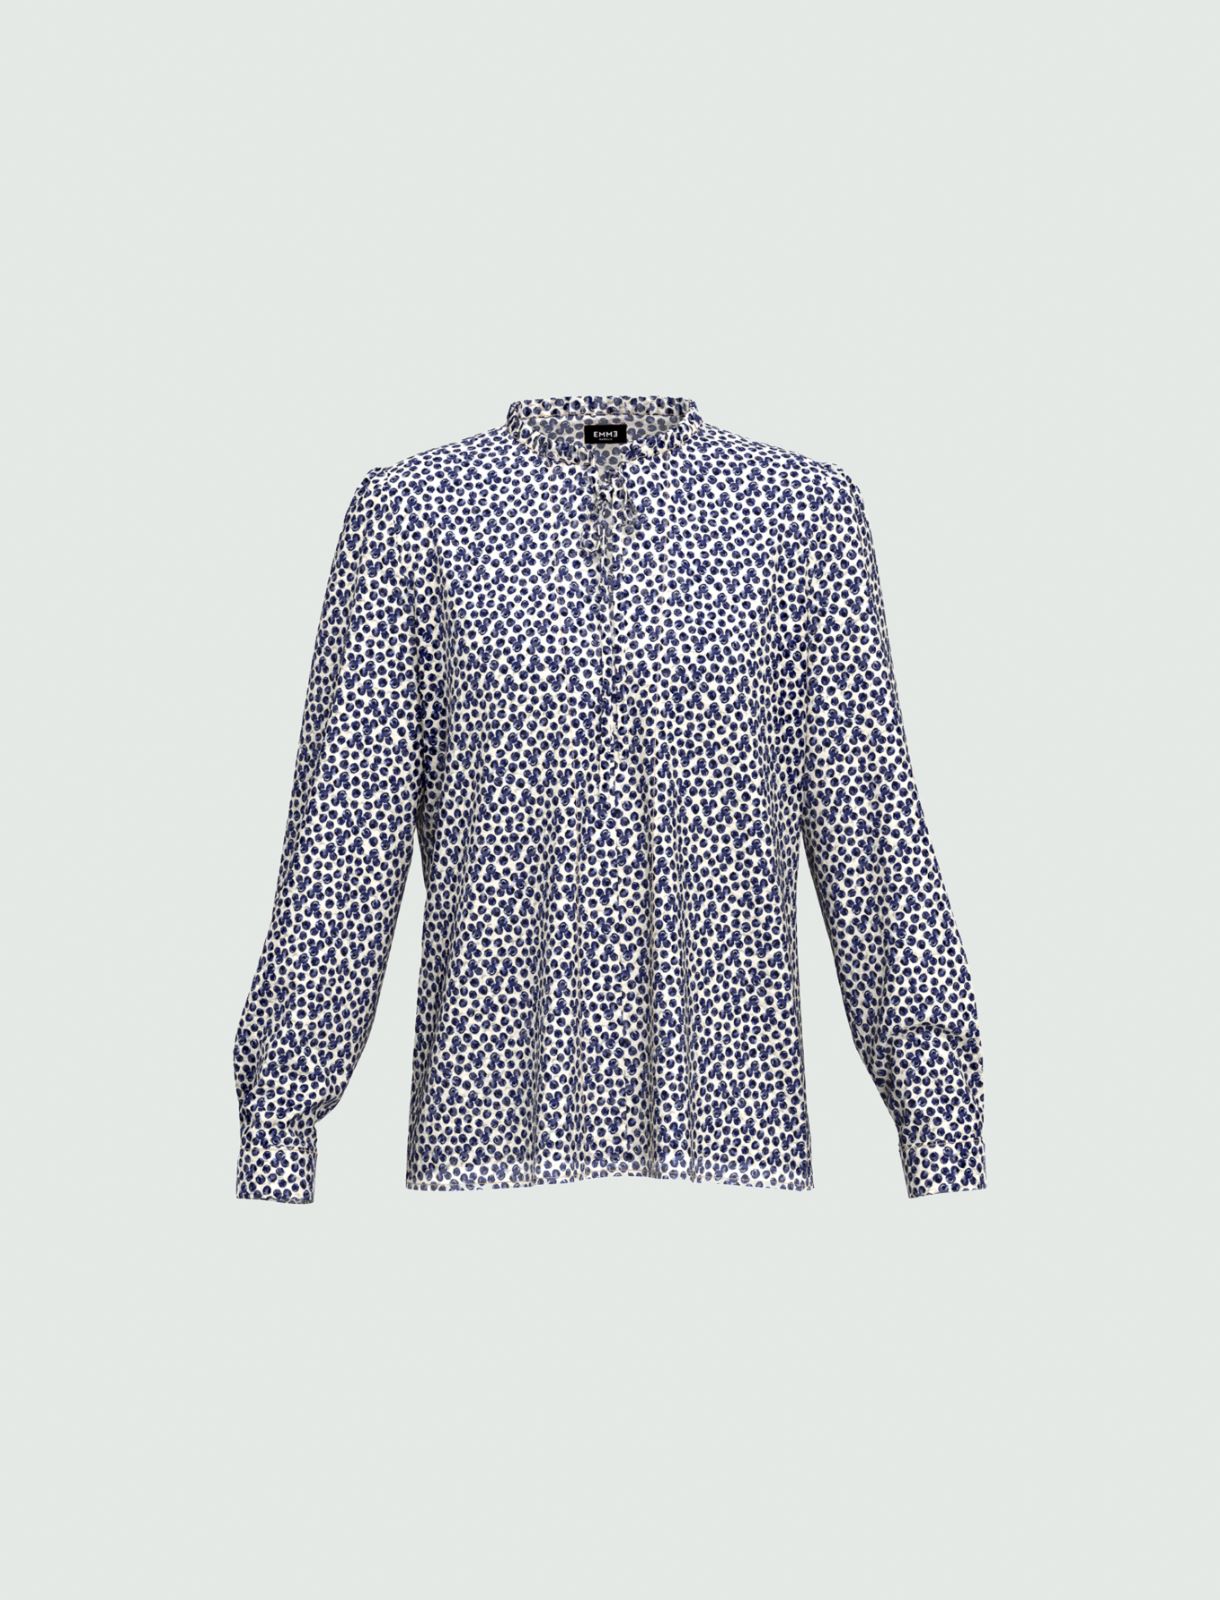 Dotted Swiss blouse - Navy - Marella